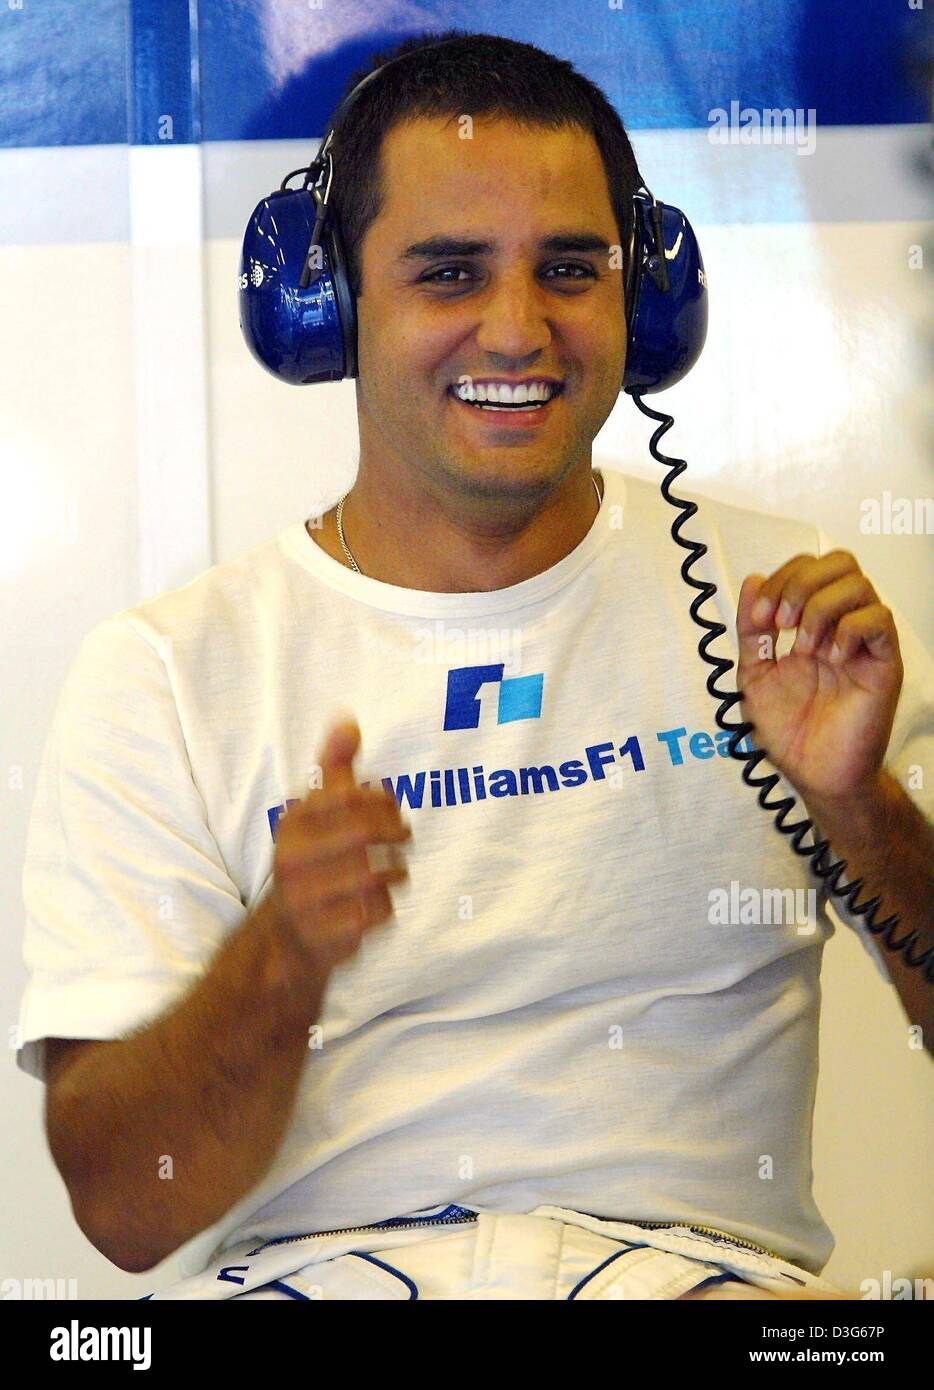 (dpa) - Colombian Formula One pilot Juan Pablo Montoya of BMW Williams smiles as he wears a set of headphones and sits in the pit during the second free practice round for the Formula One Hungarian Grand Prix on the Hungaroring circuit, near Budapest, Hungary, 23 August 2003. Montoya will drive the 2005 formula one season for the team of McLaren-Mercedes. The German-British team of Stock Photo